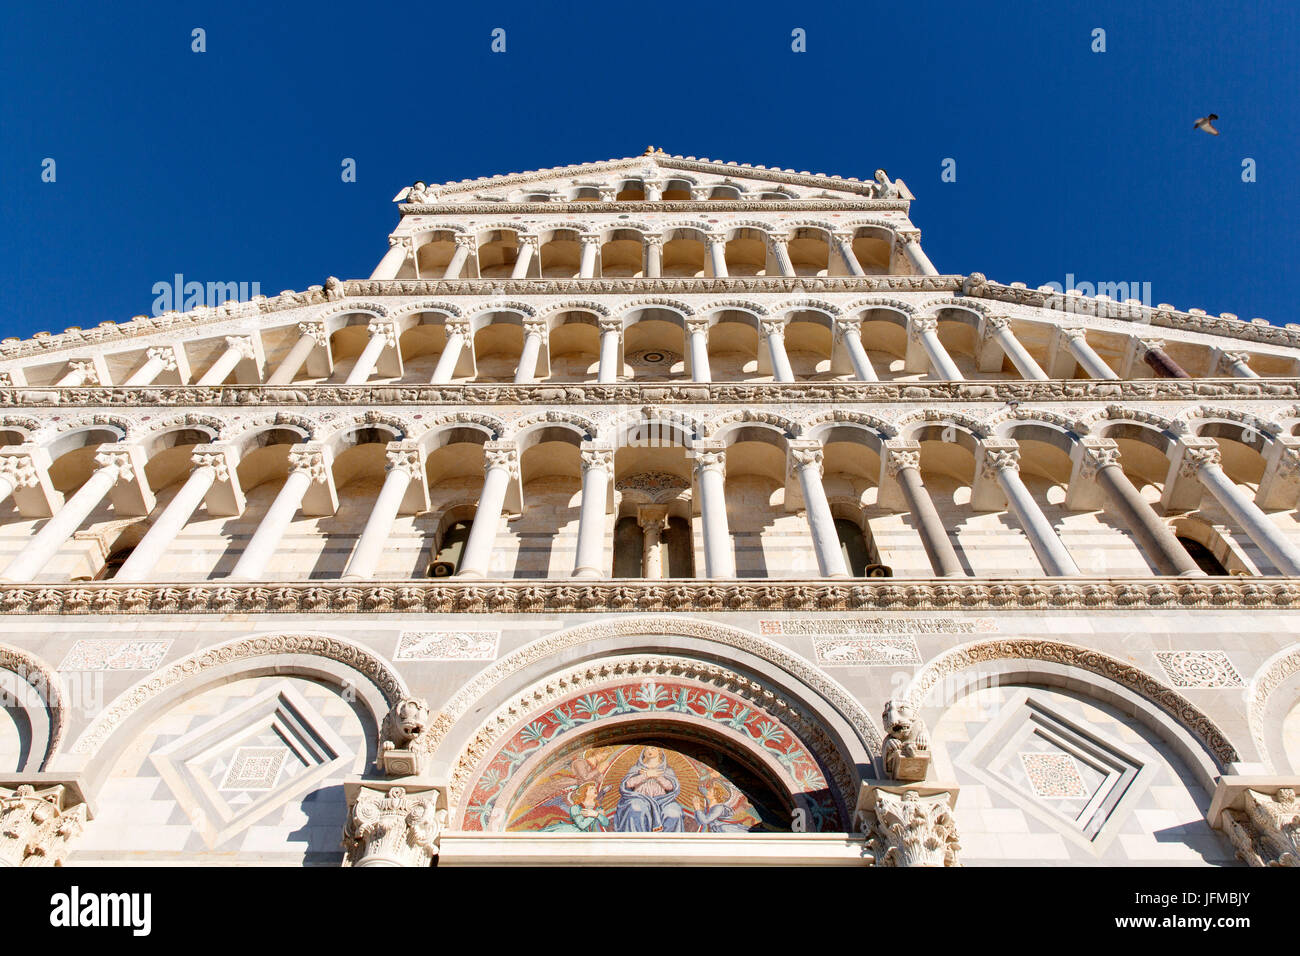 Europe, Italy, Tuscany, Pisa, Architectural details Stock Photo